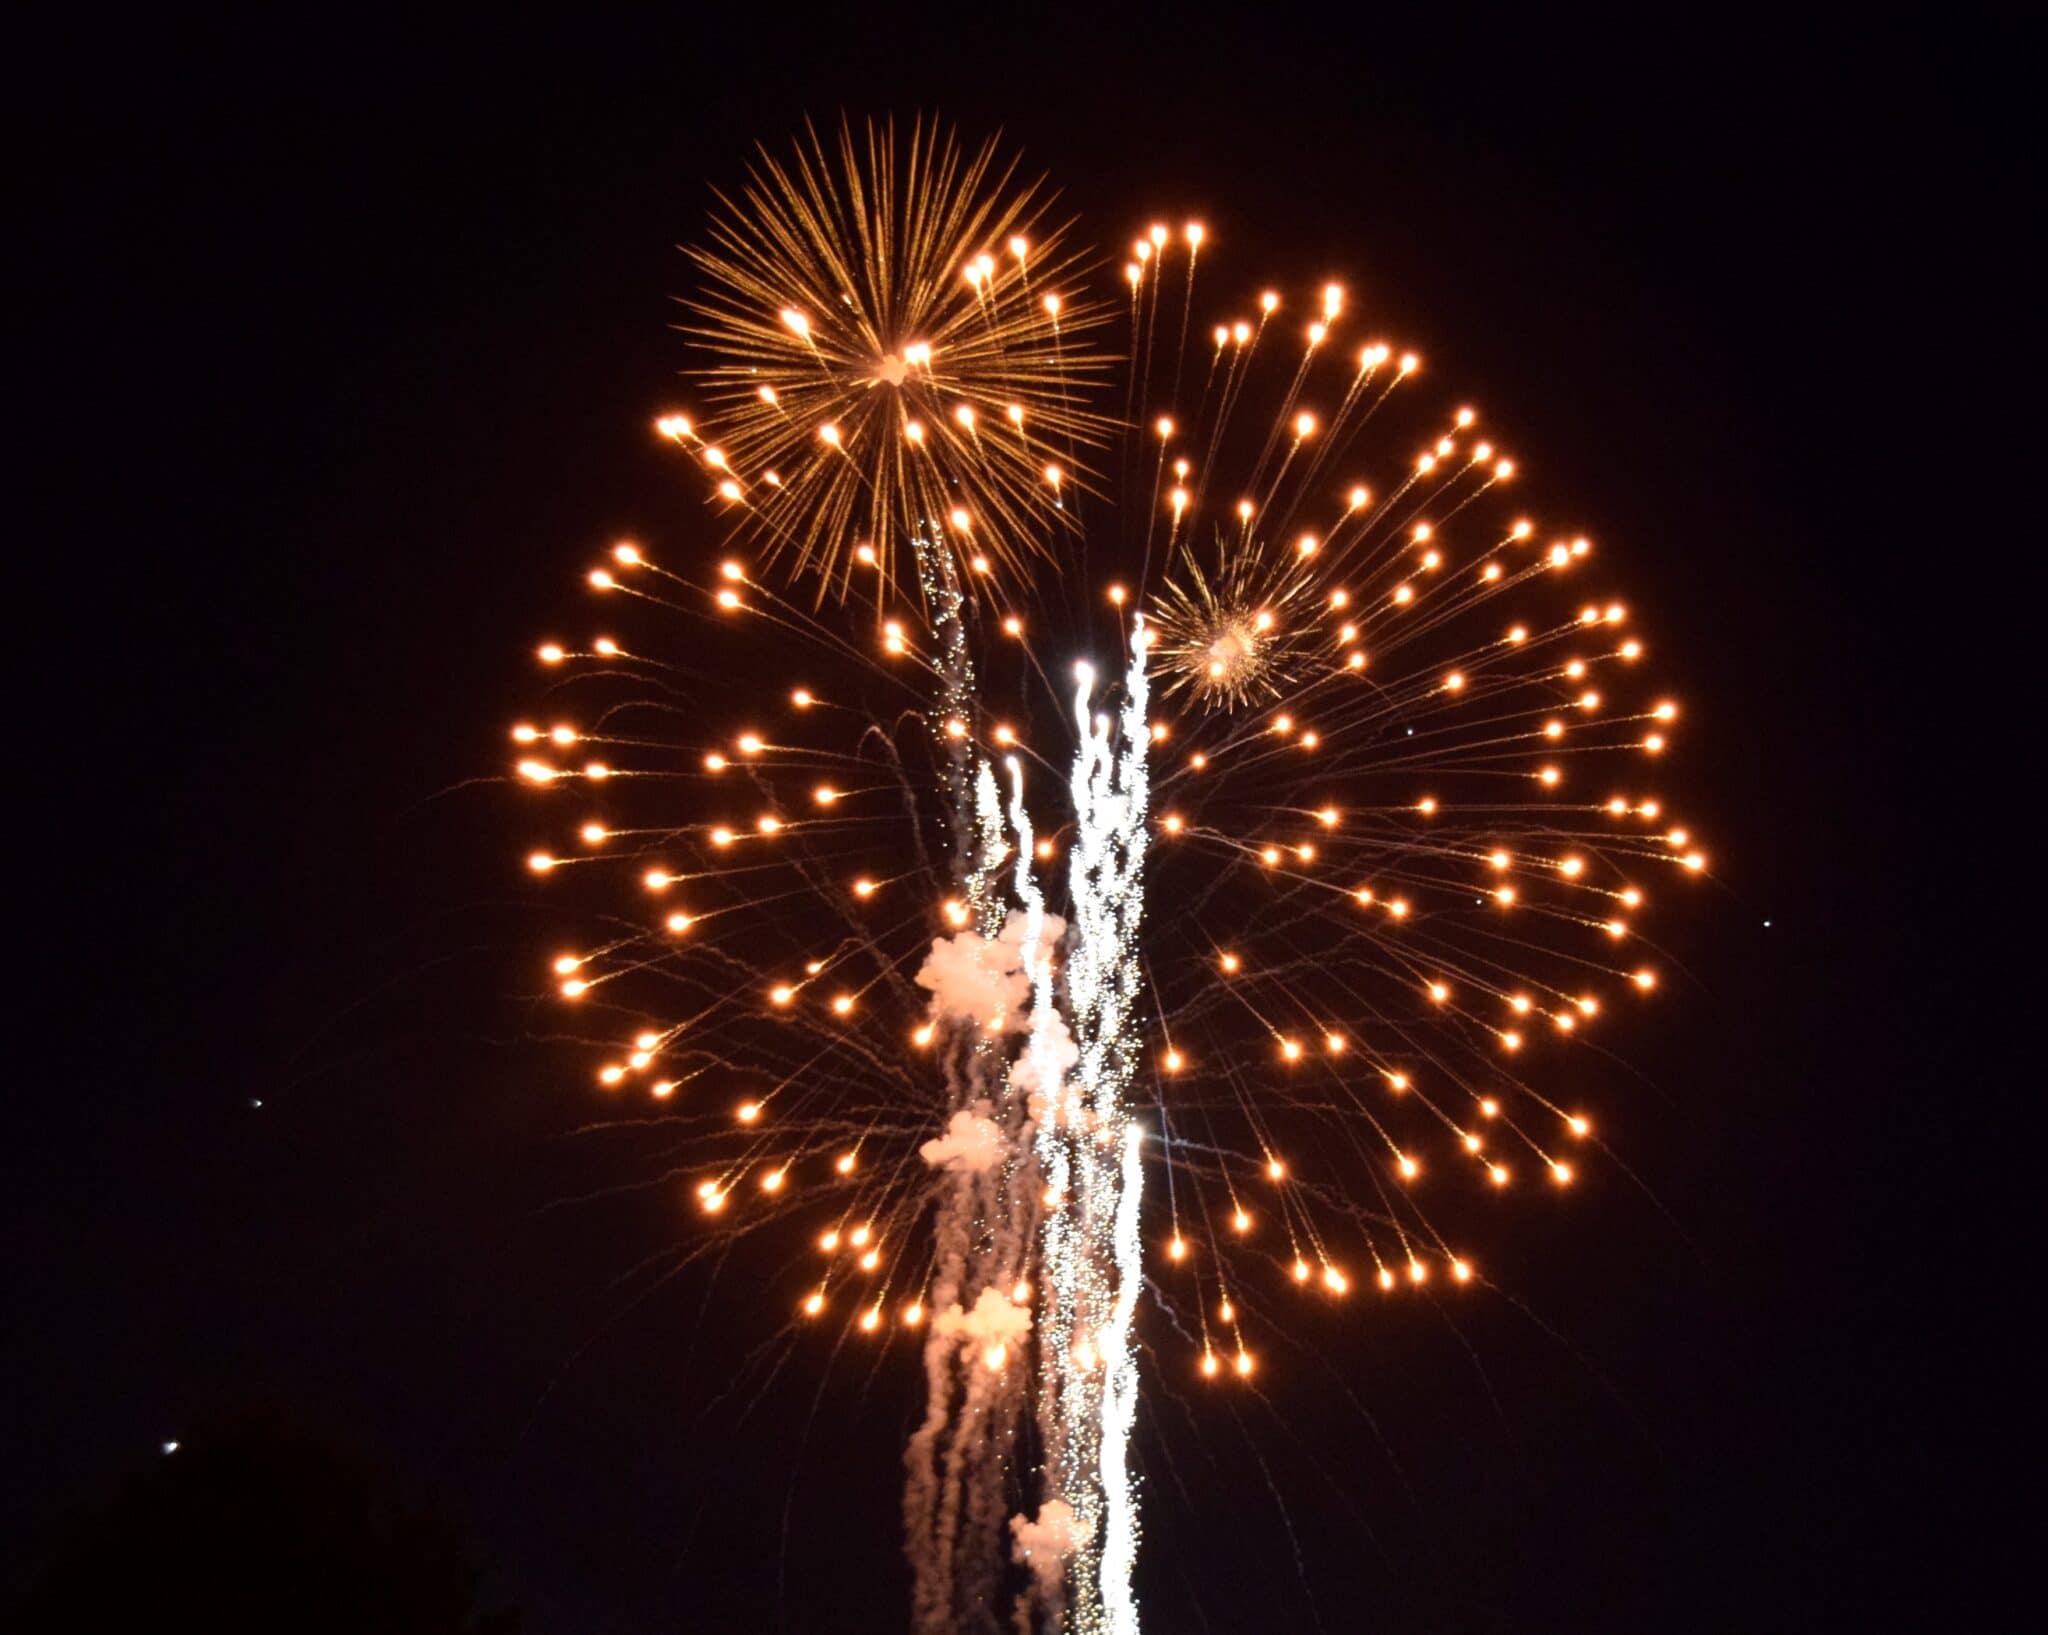 Roswell's annual Fourth of July fireworks show will be held at Roswell Area Park